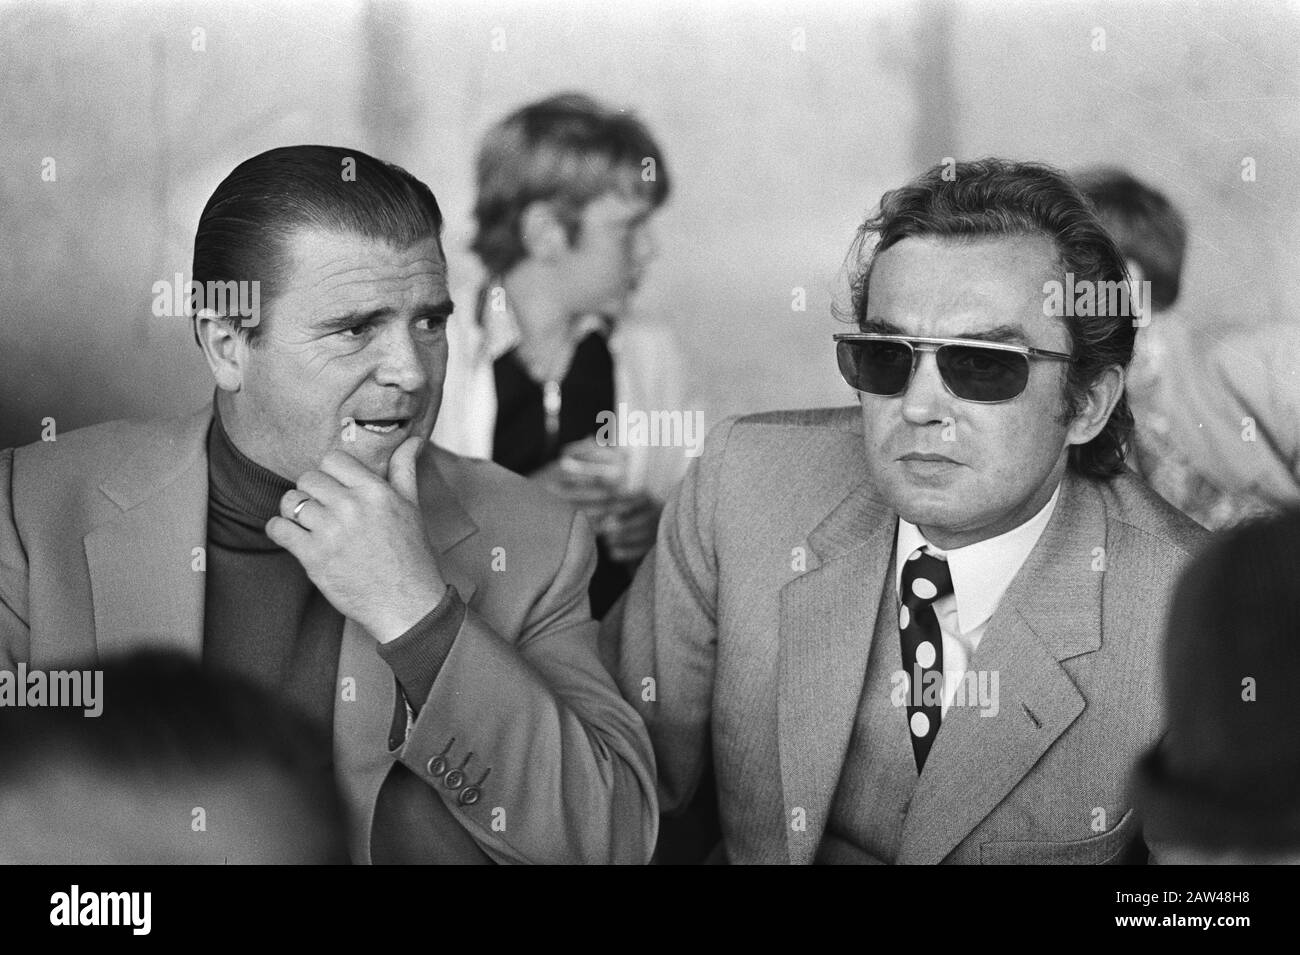 FC Utrecht against Ajax 0-3  Puskas (l), coach of Panathinaikos FC, and Happel (R), coach of Feyenoord, the gallery Date: May 23, 1971 Location : Utrecht (province), Utrecht (city) Keywords: sport, trainers, bleachers, football Person Name: Happel, Ernst, Puskas Ferenc Institution Name: FC Utrecht Stock Photo